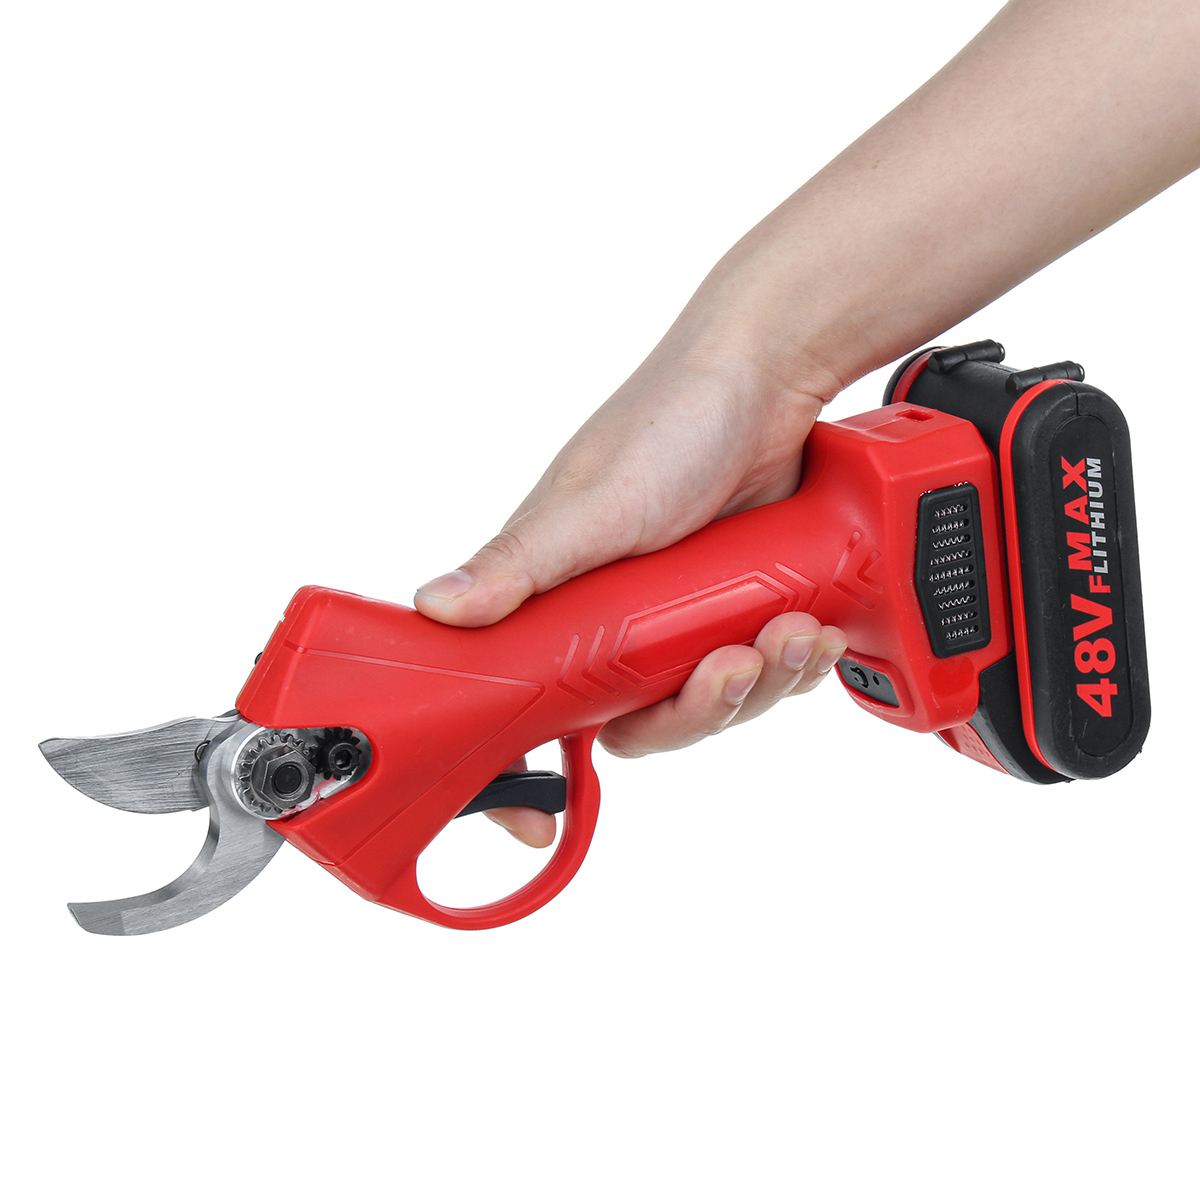 Rechargeable electric pruning shears